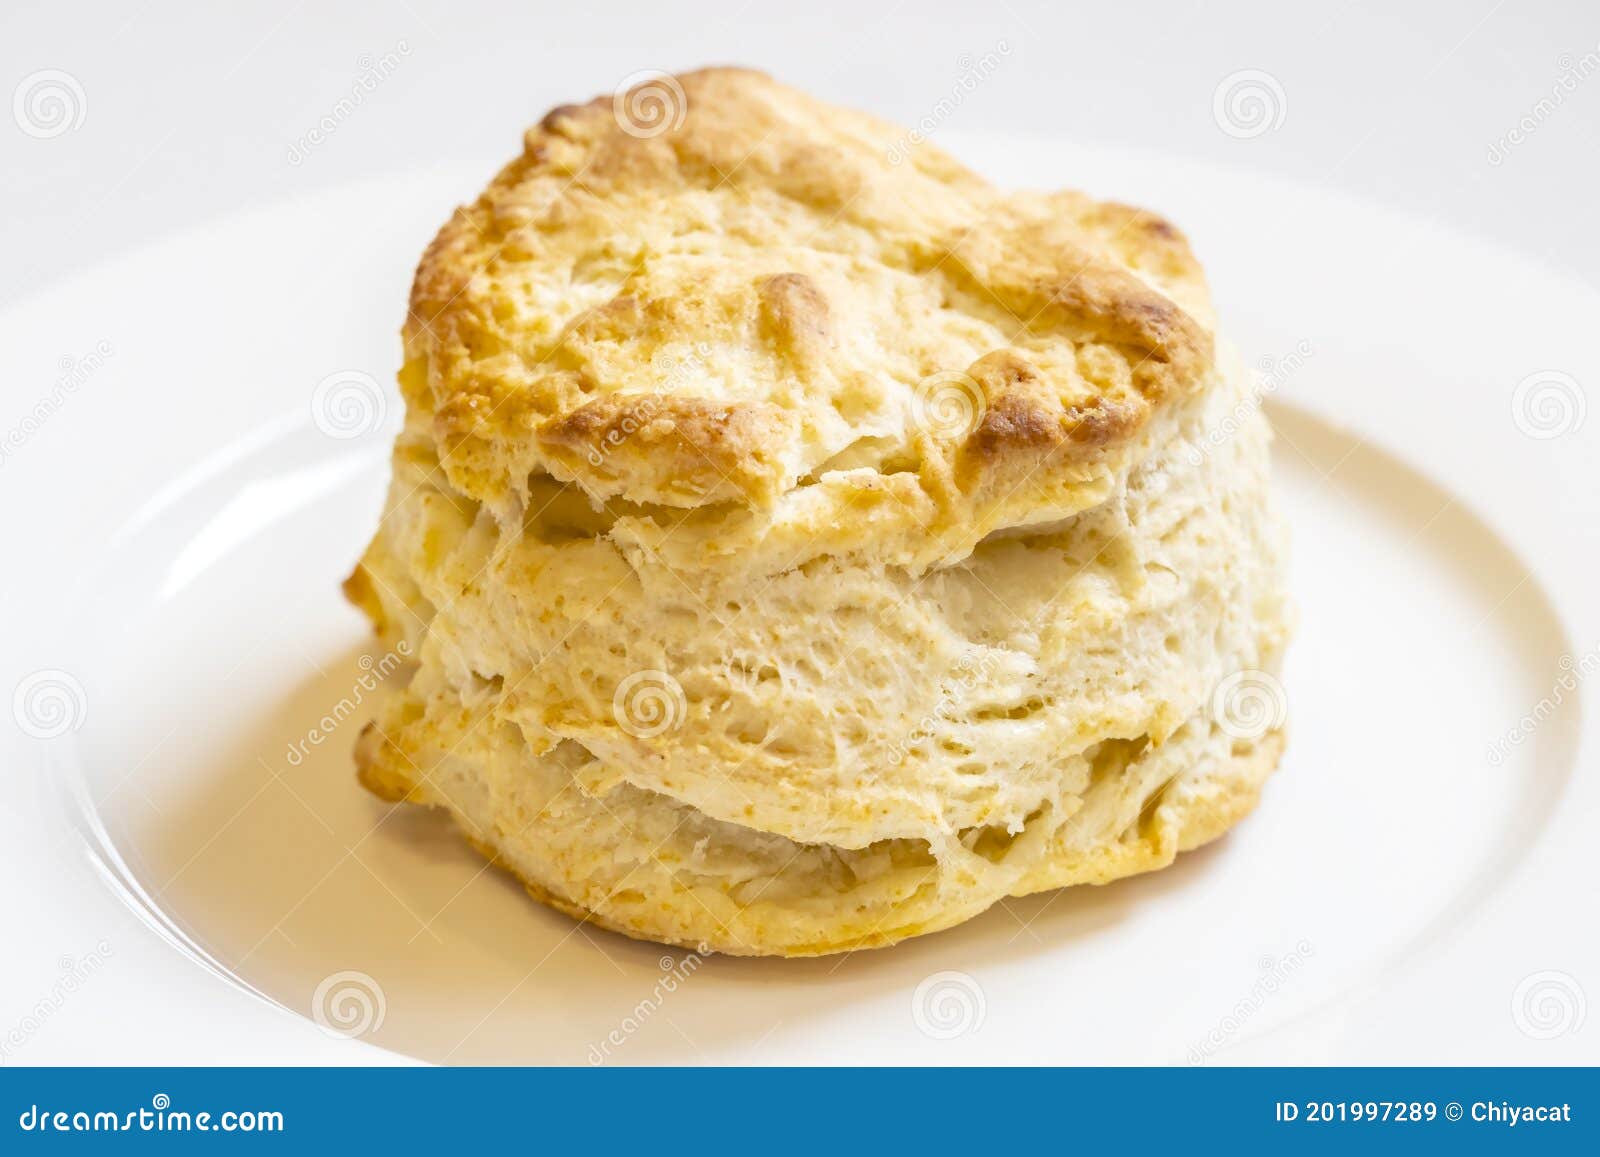 a freshly baked buttermilk biscuit